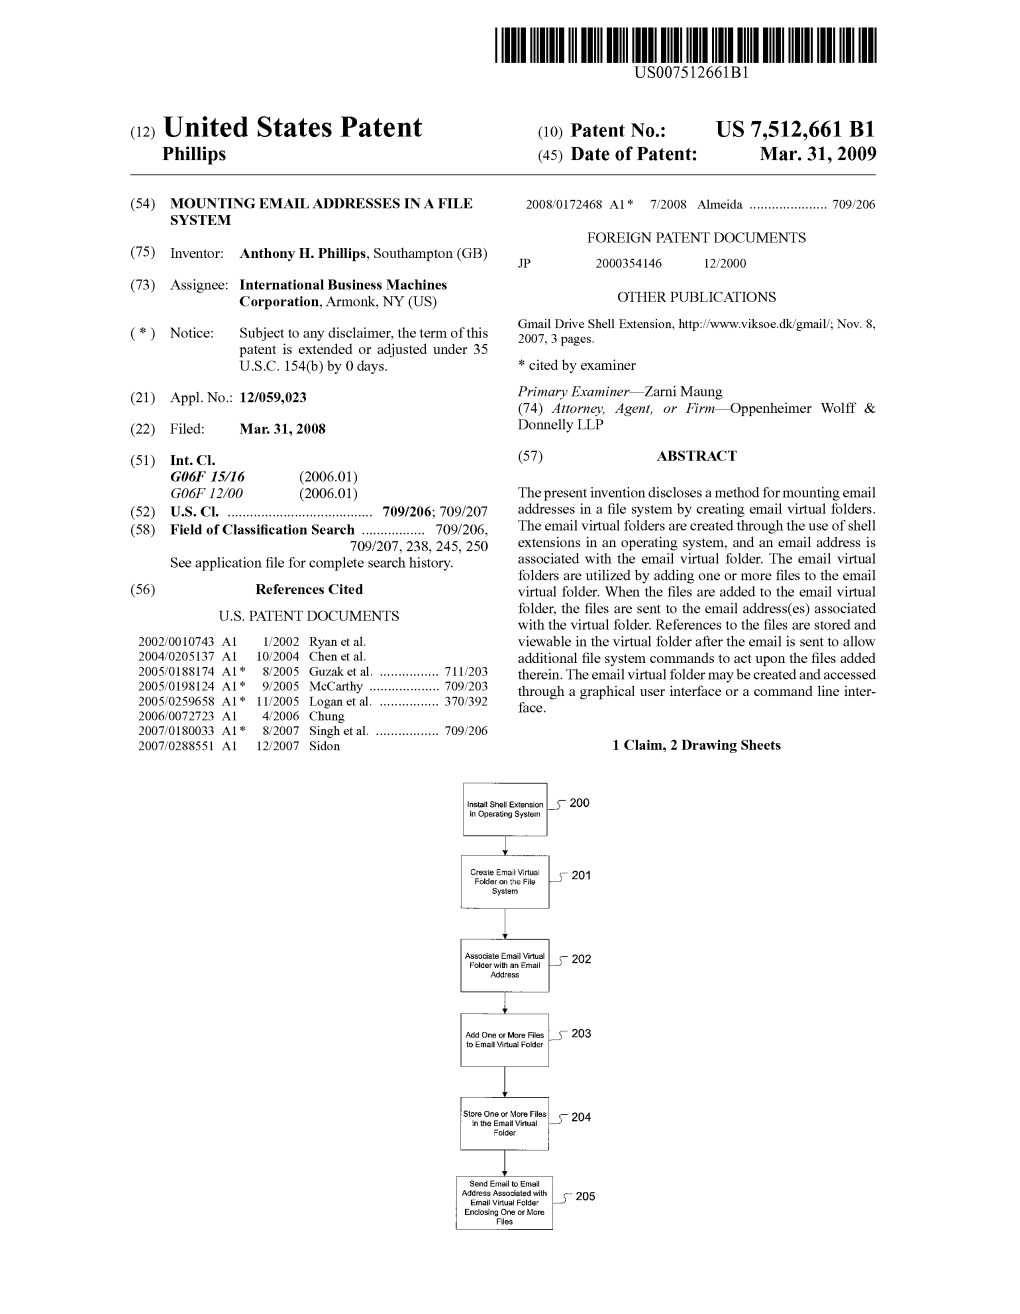 (12) United States Patent (10) Patent No.: US 7,512,661 B1 Phillips (45) Date of Patent: Mar